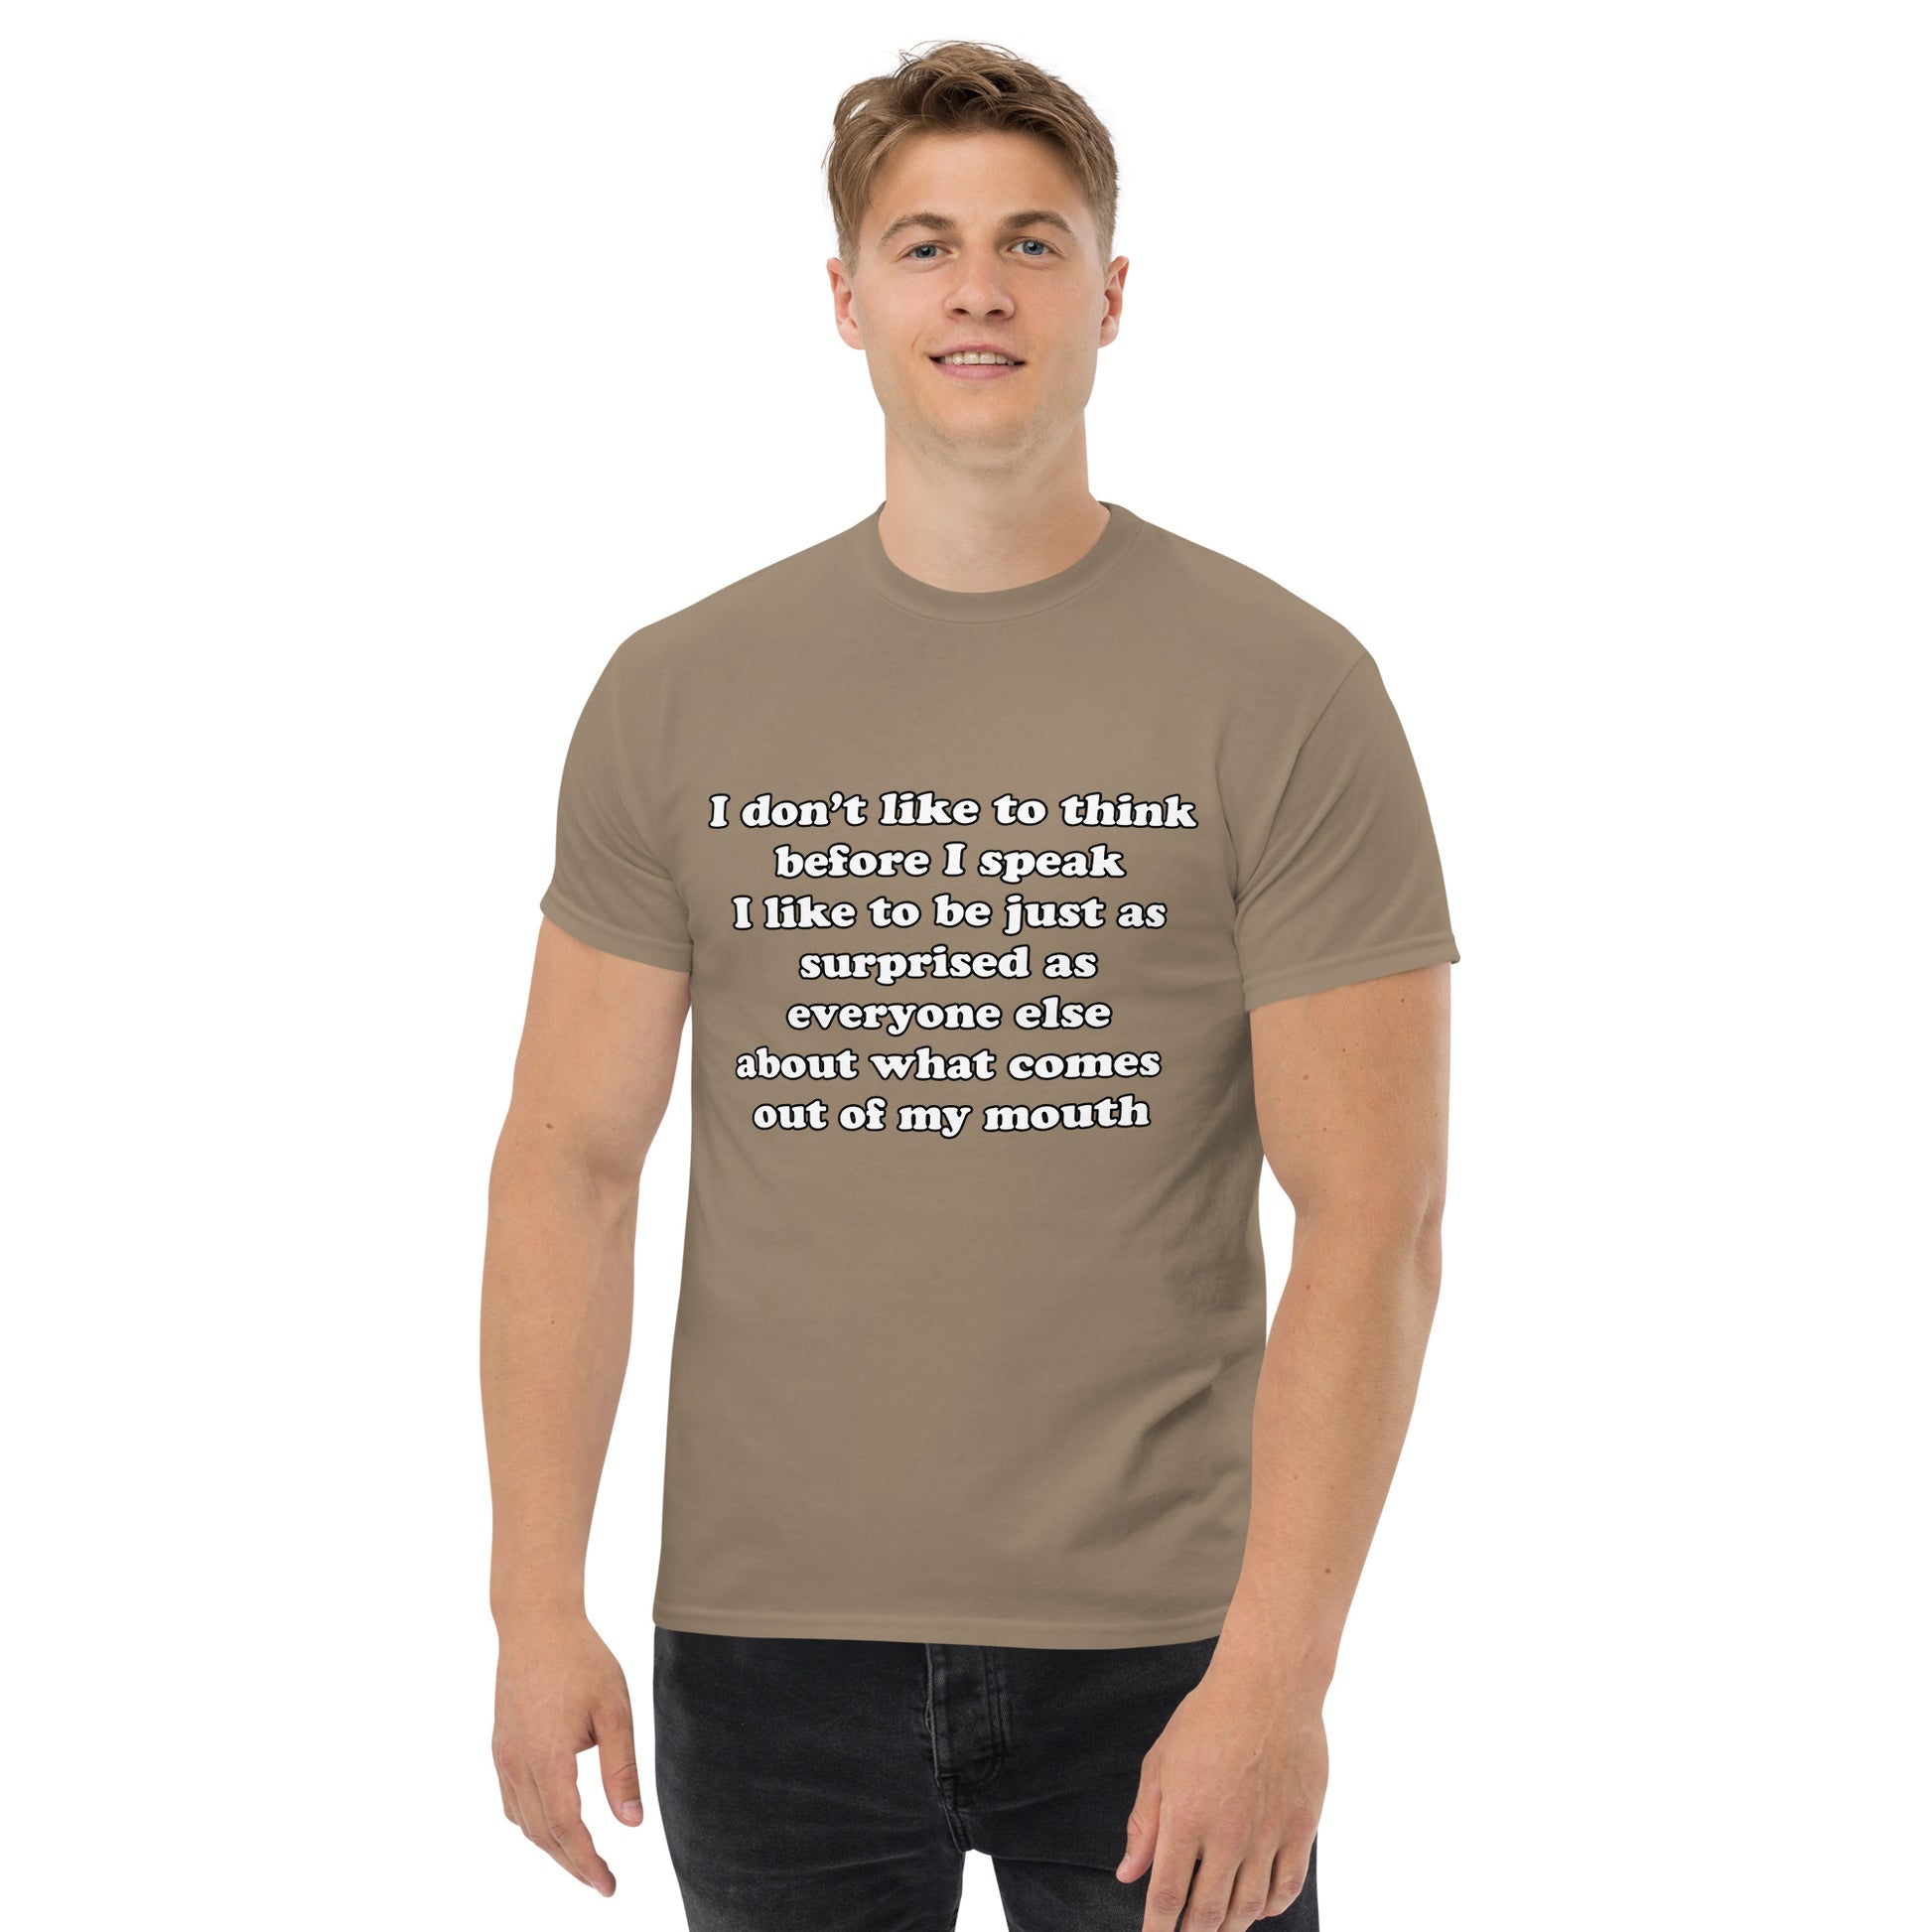 Man with savana brown t-shirt with text “I don't think before I speak Just as serprised as everyone about what comes out of my mouth"